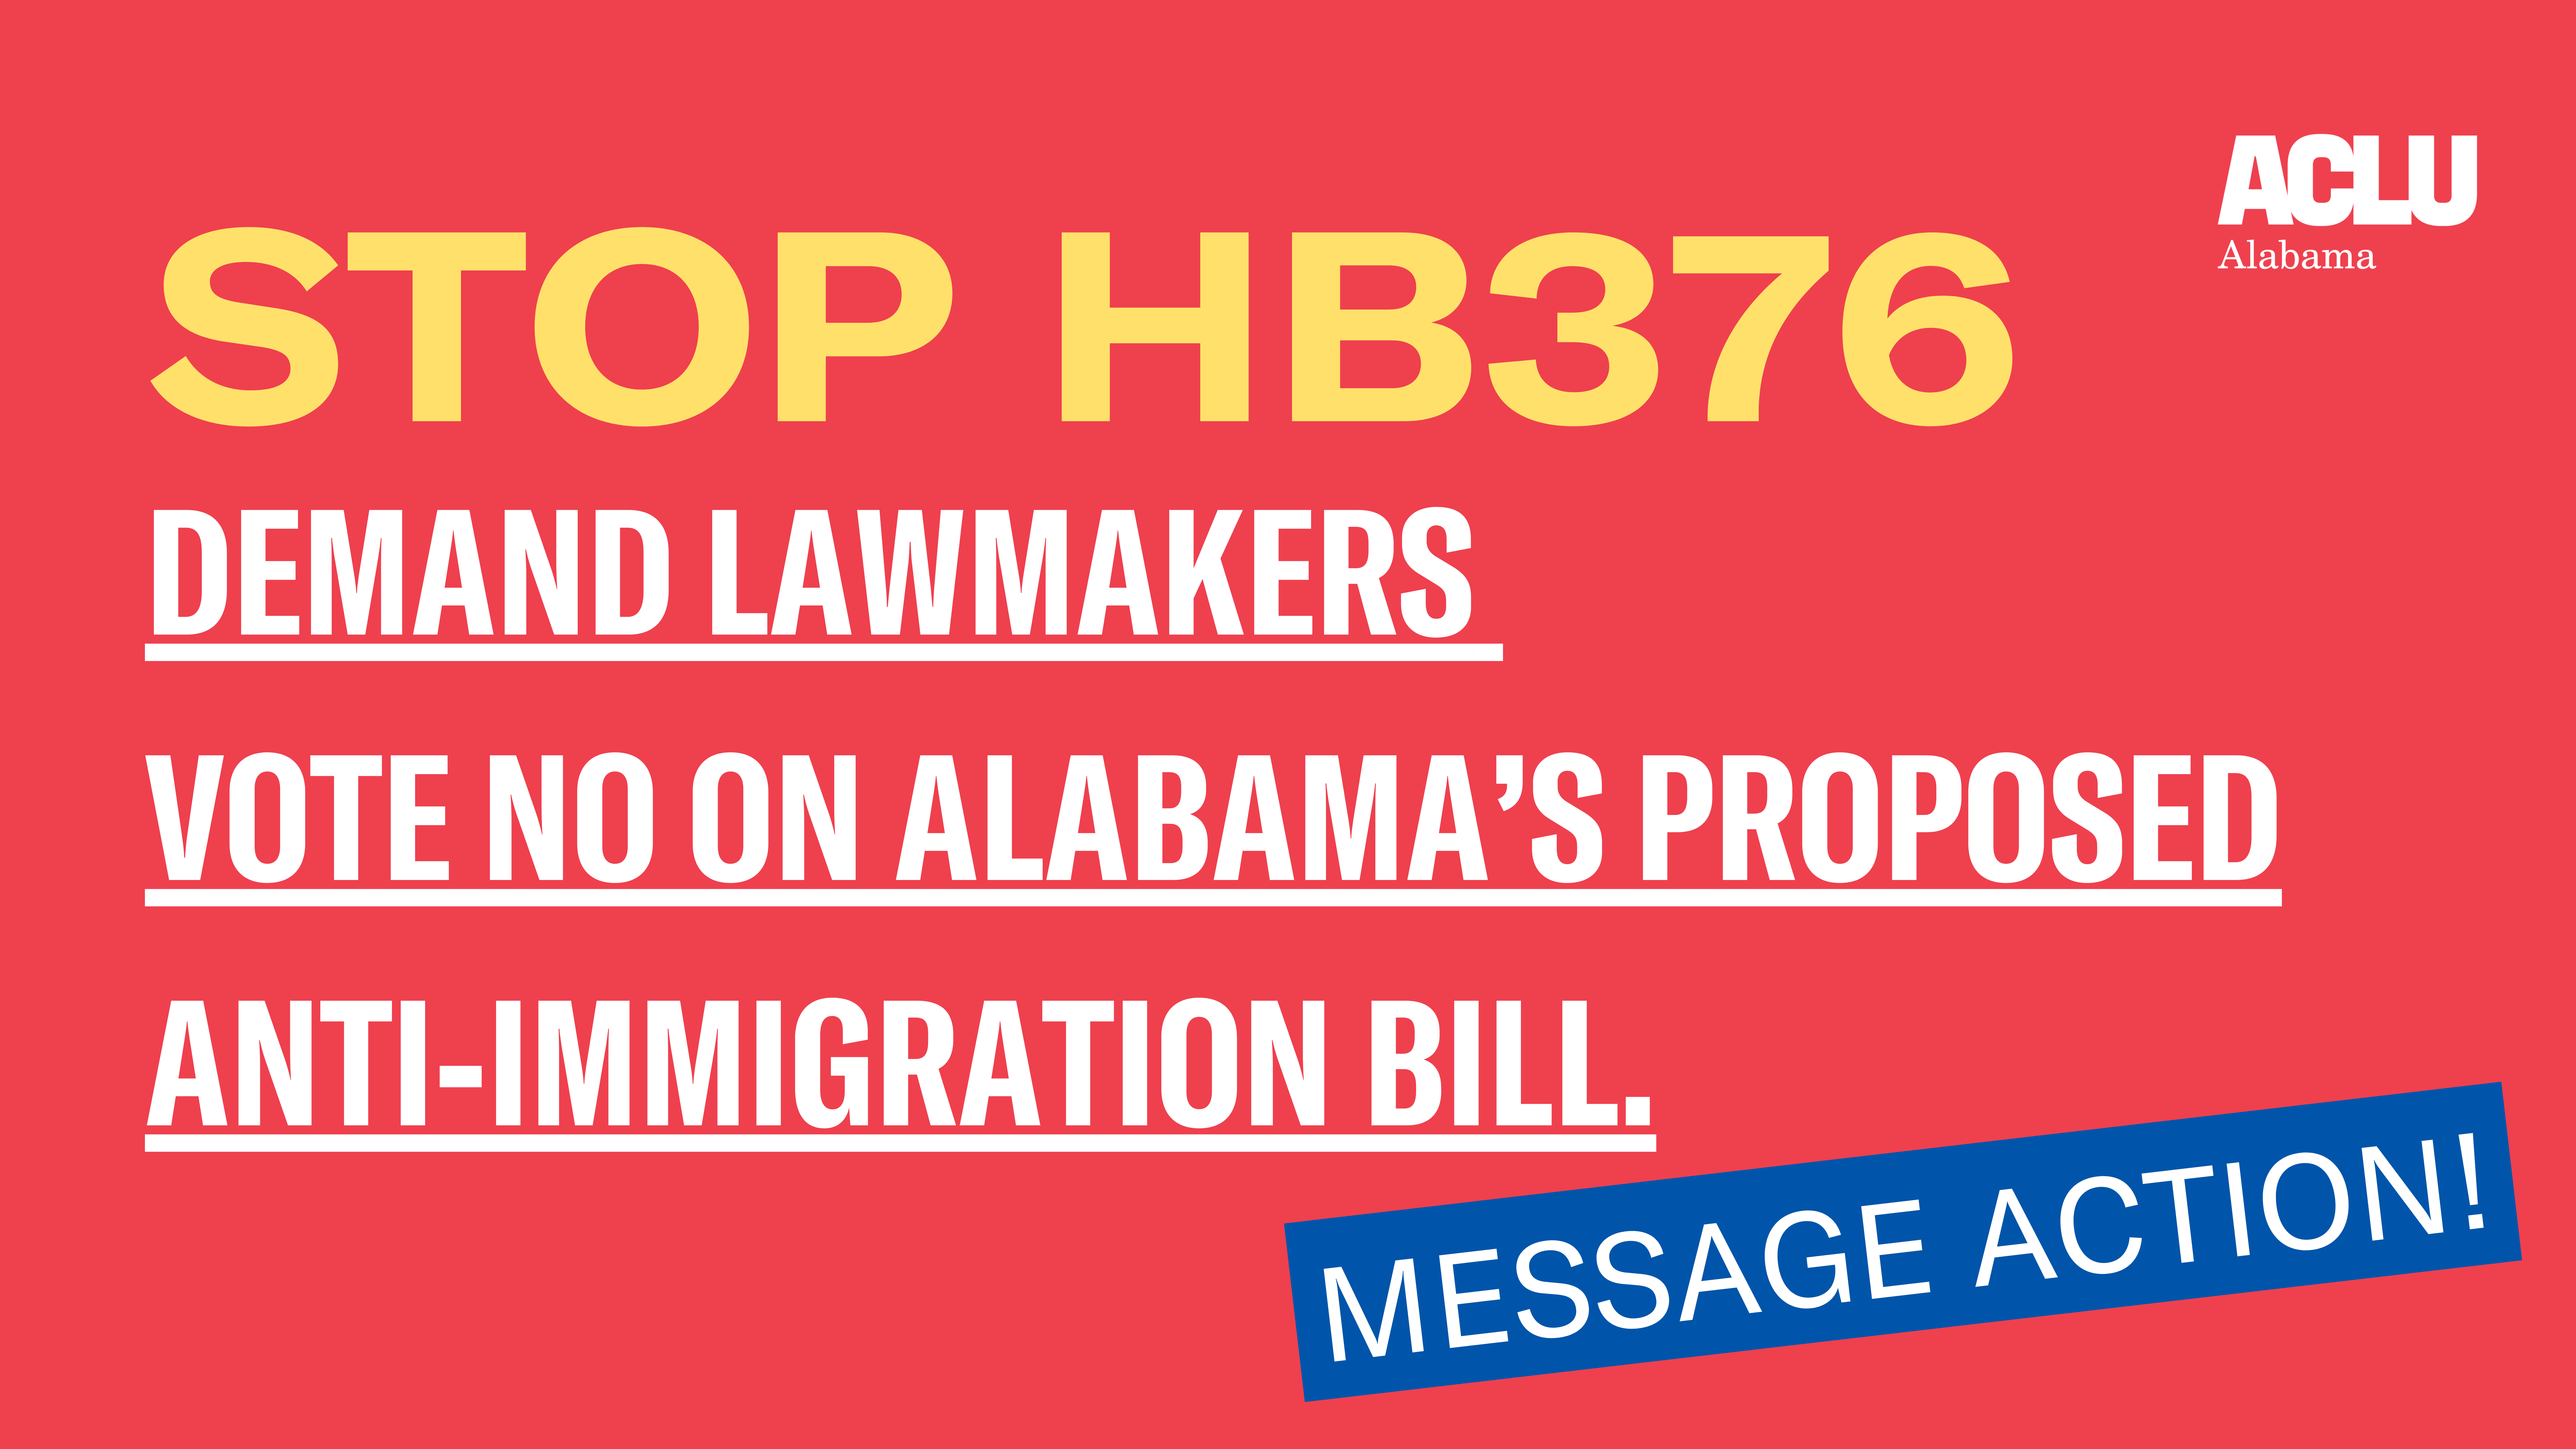 DEMAND LAWMAKERS  VOTE NO ON ALABAMA’S PROPOSED ANTI-IMMIGRATION BILL.